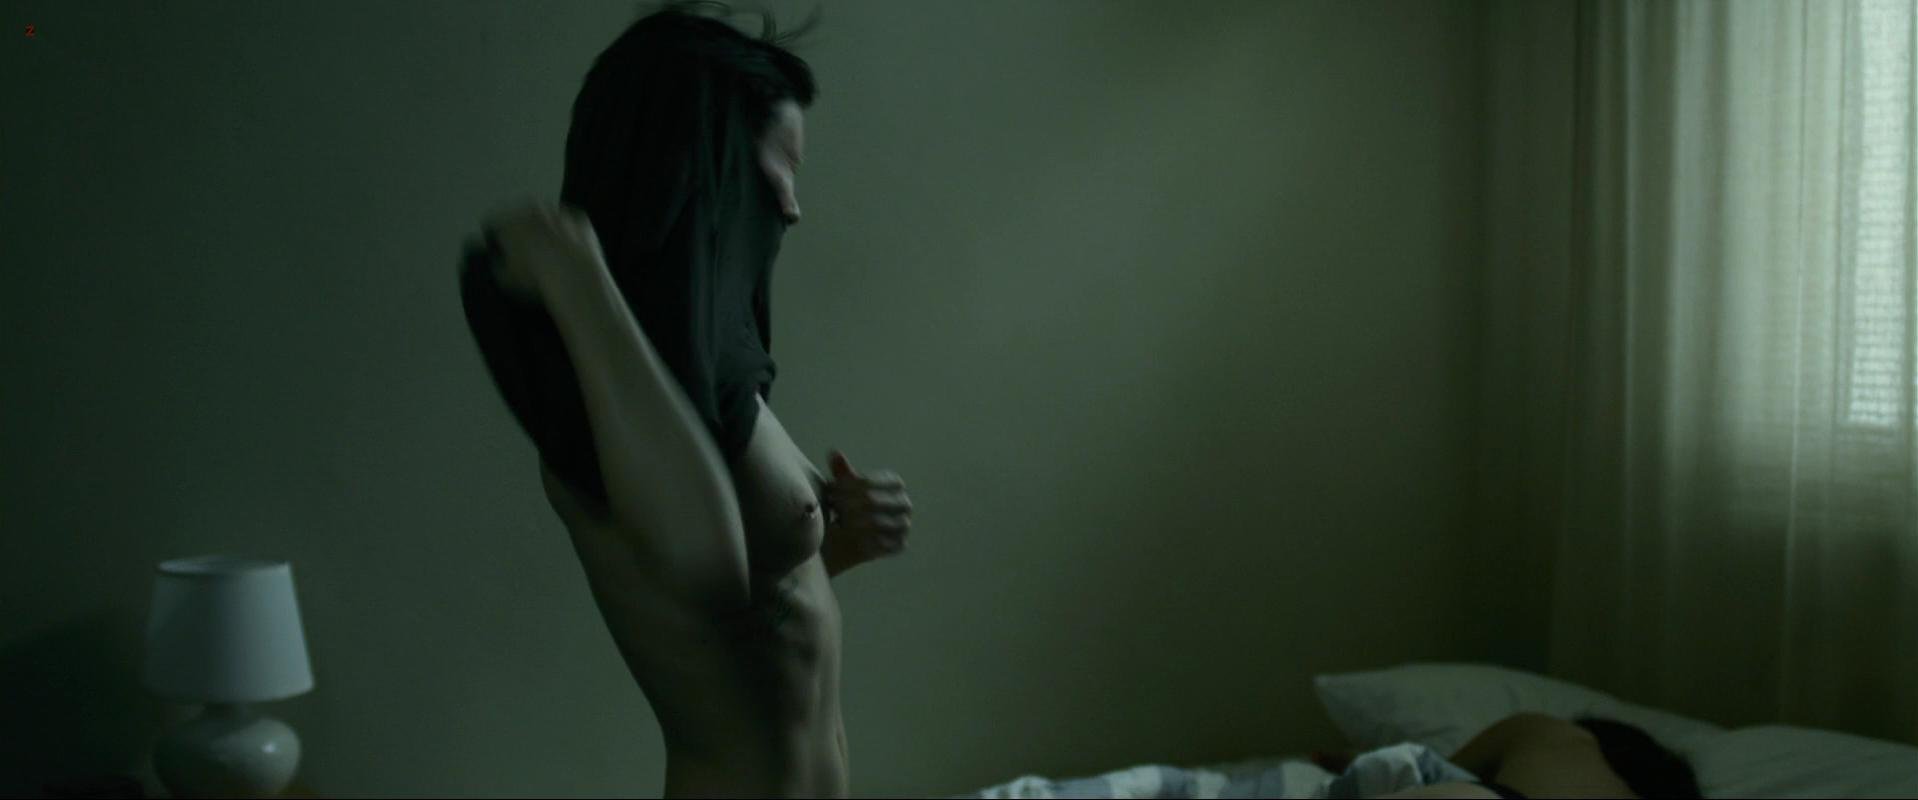 Rooney Mara nude - The Girl with the Dragon Tattoo (2011) .